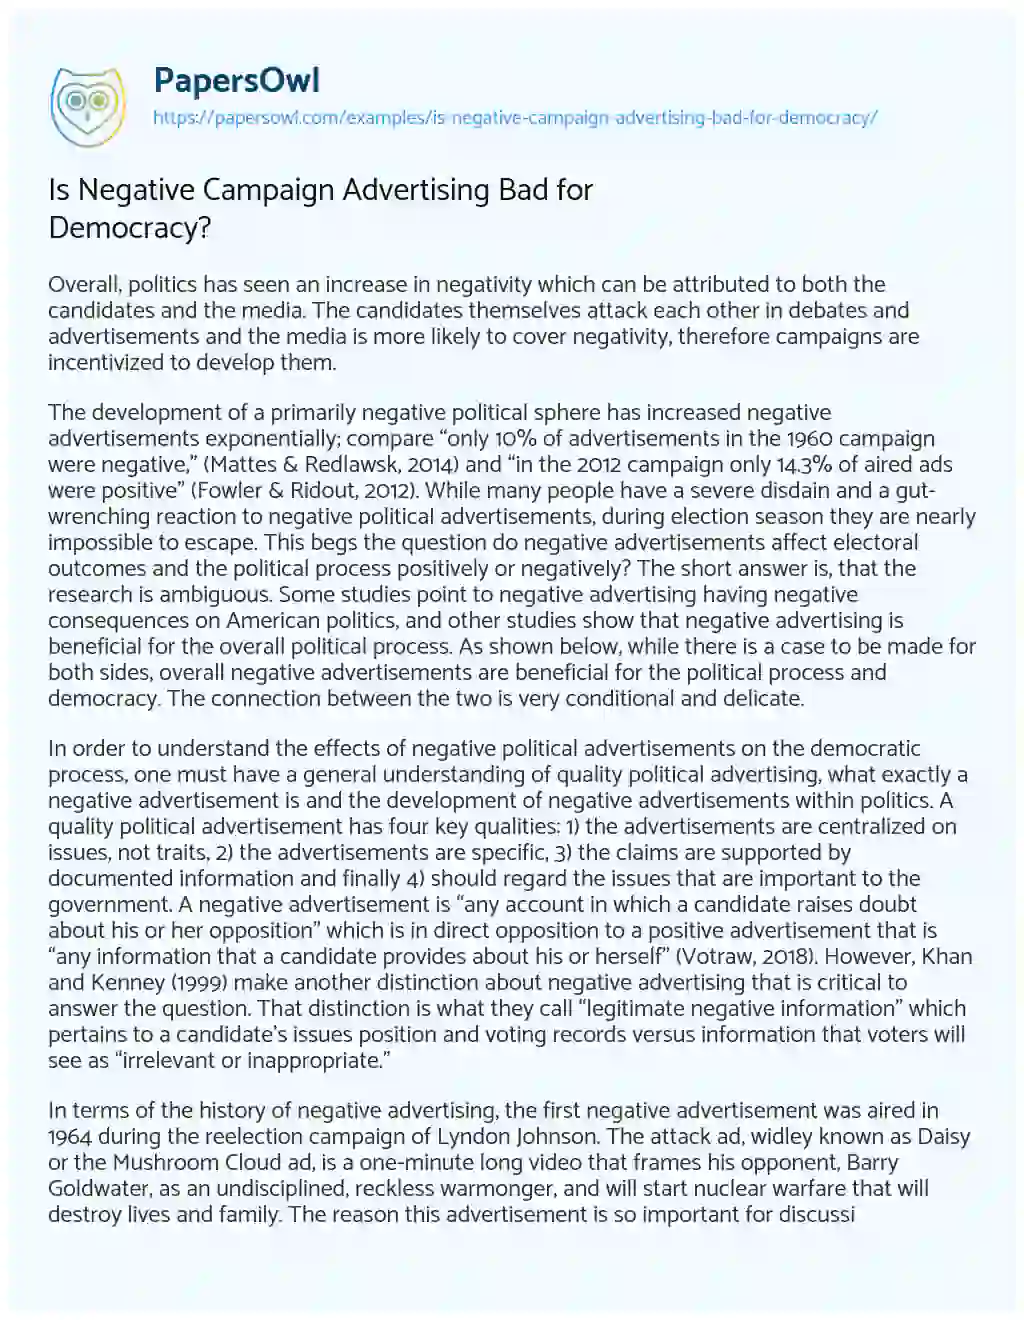 Essay on Is Negative Campaign Advertising Bad for Democracy?